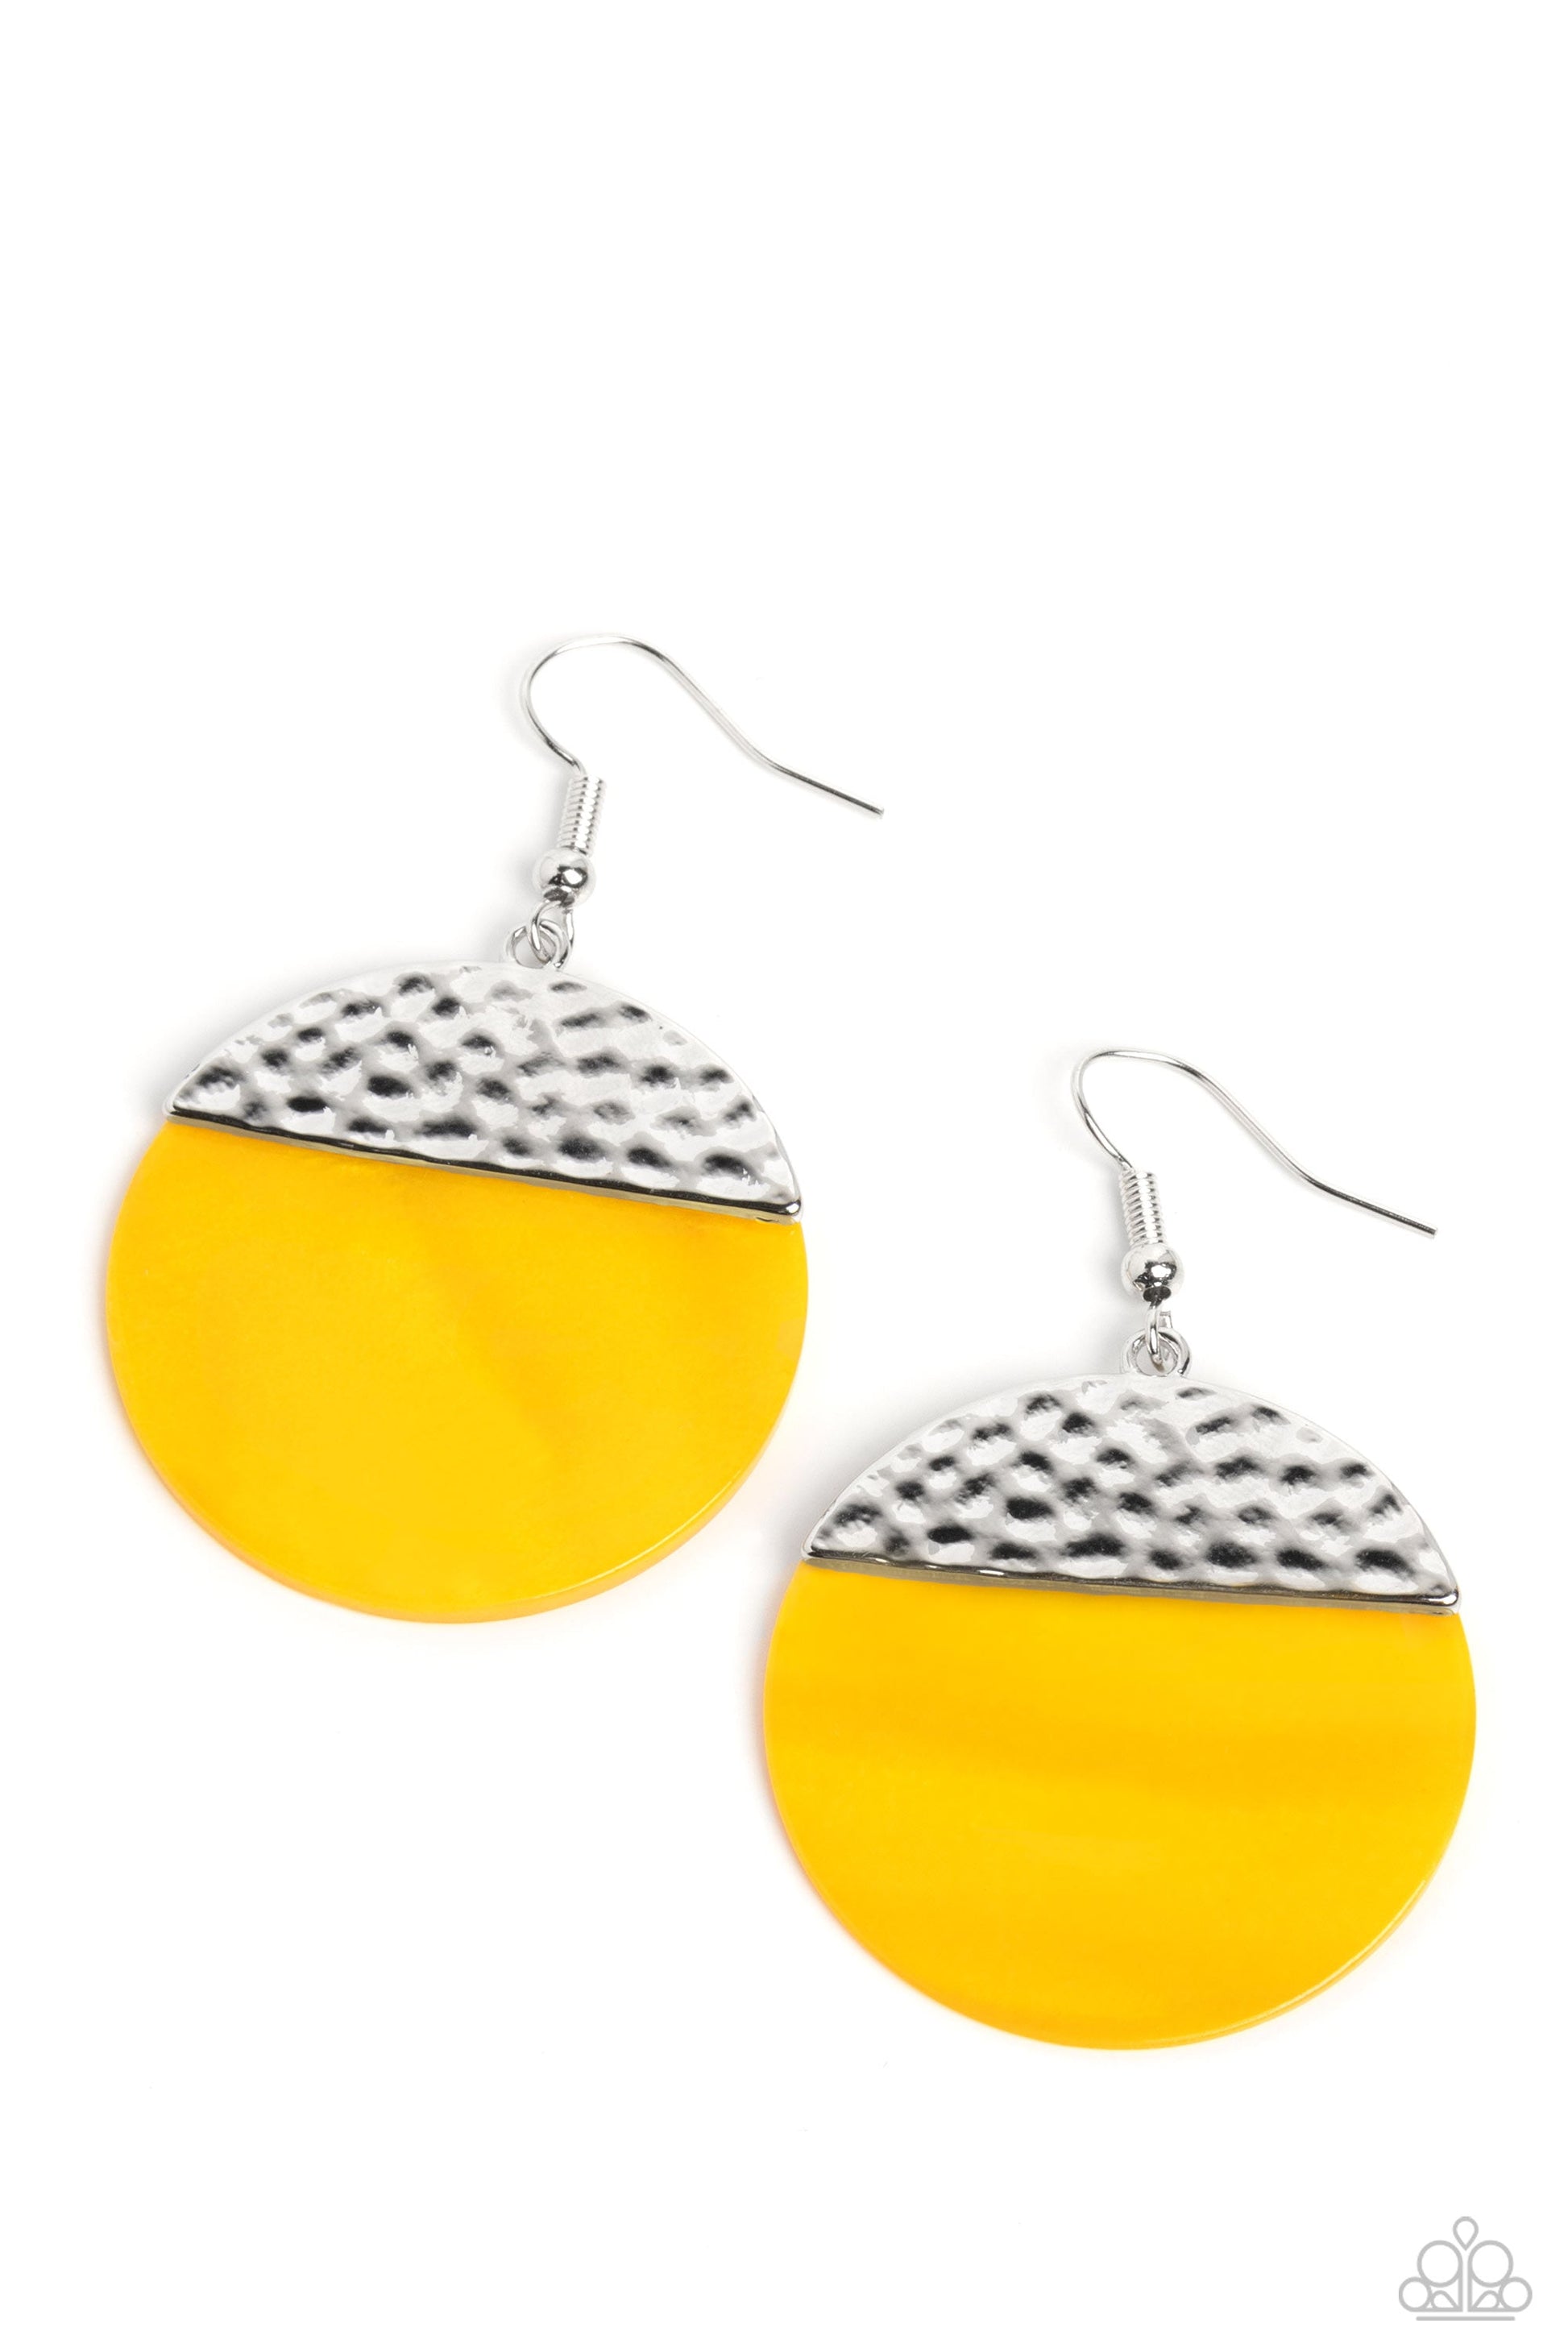 SHELL Out - Yellow and Silver Earrings - Paparazzi Accessories Bejeweled Accessories By Kristie